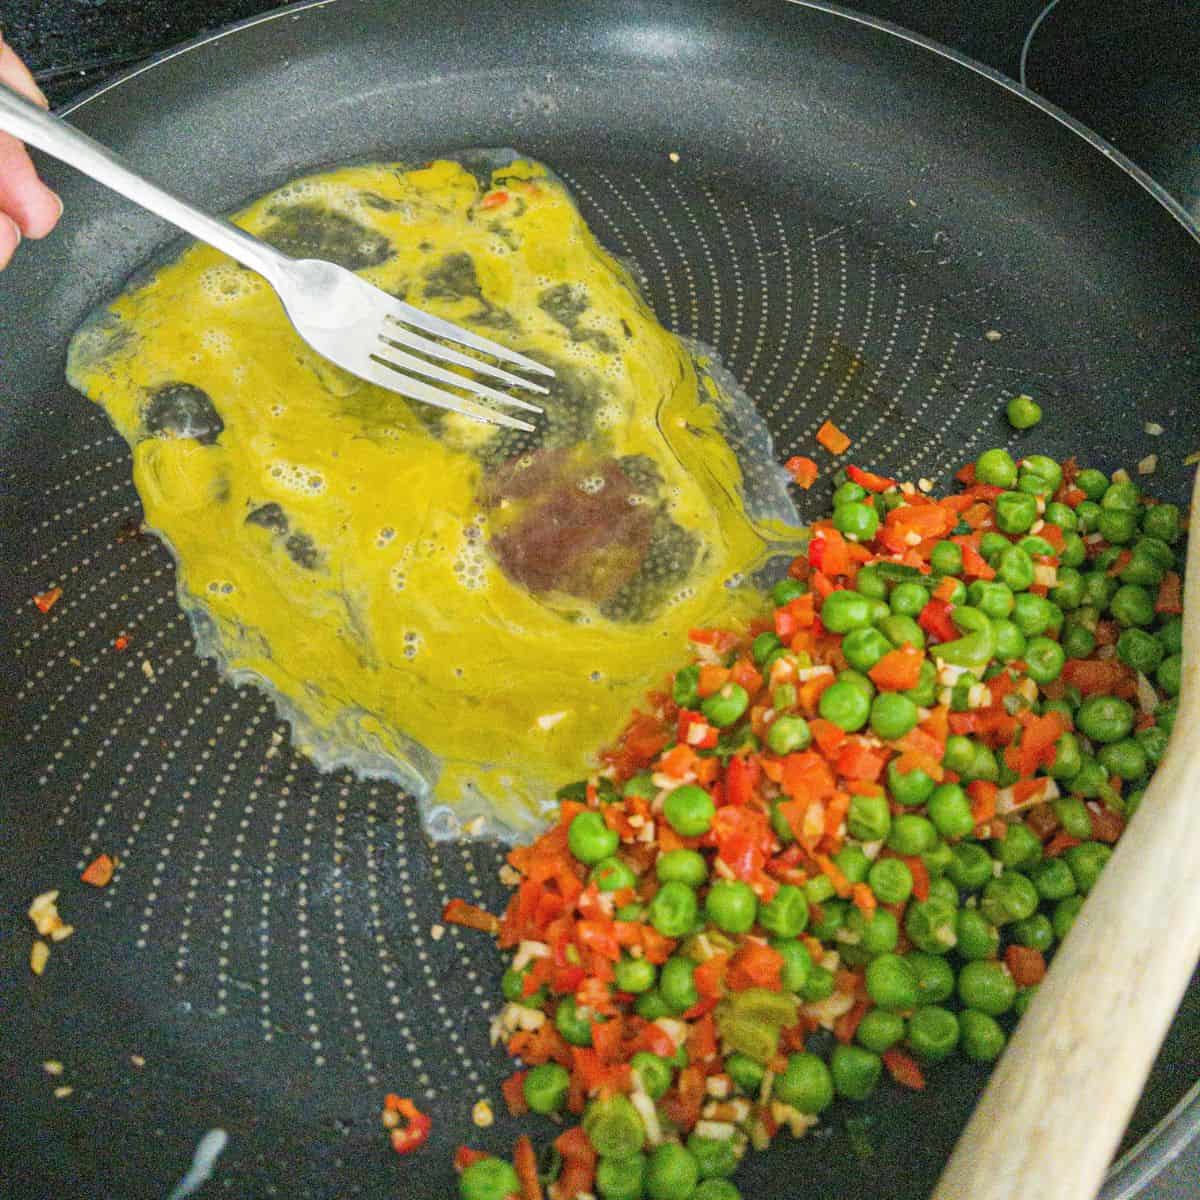 Peas and red pepper on one side of frying pan and eggs being scrambled in the other side.